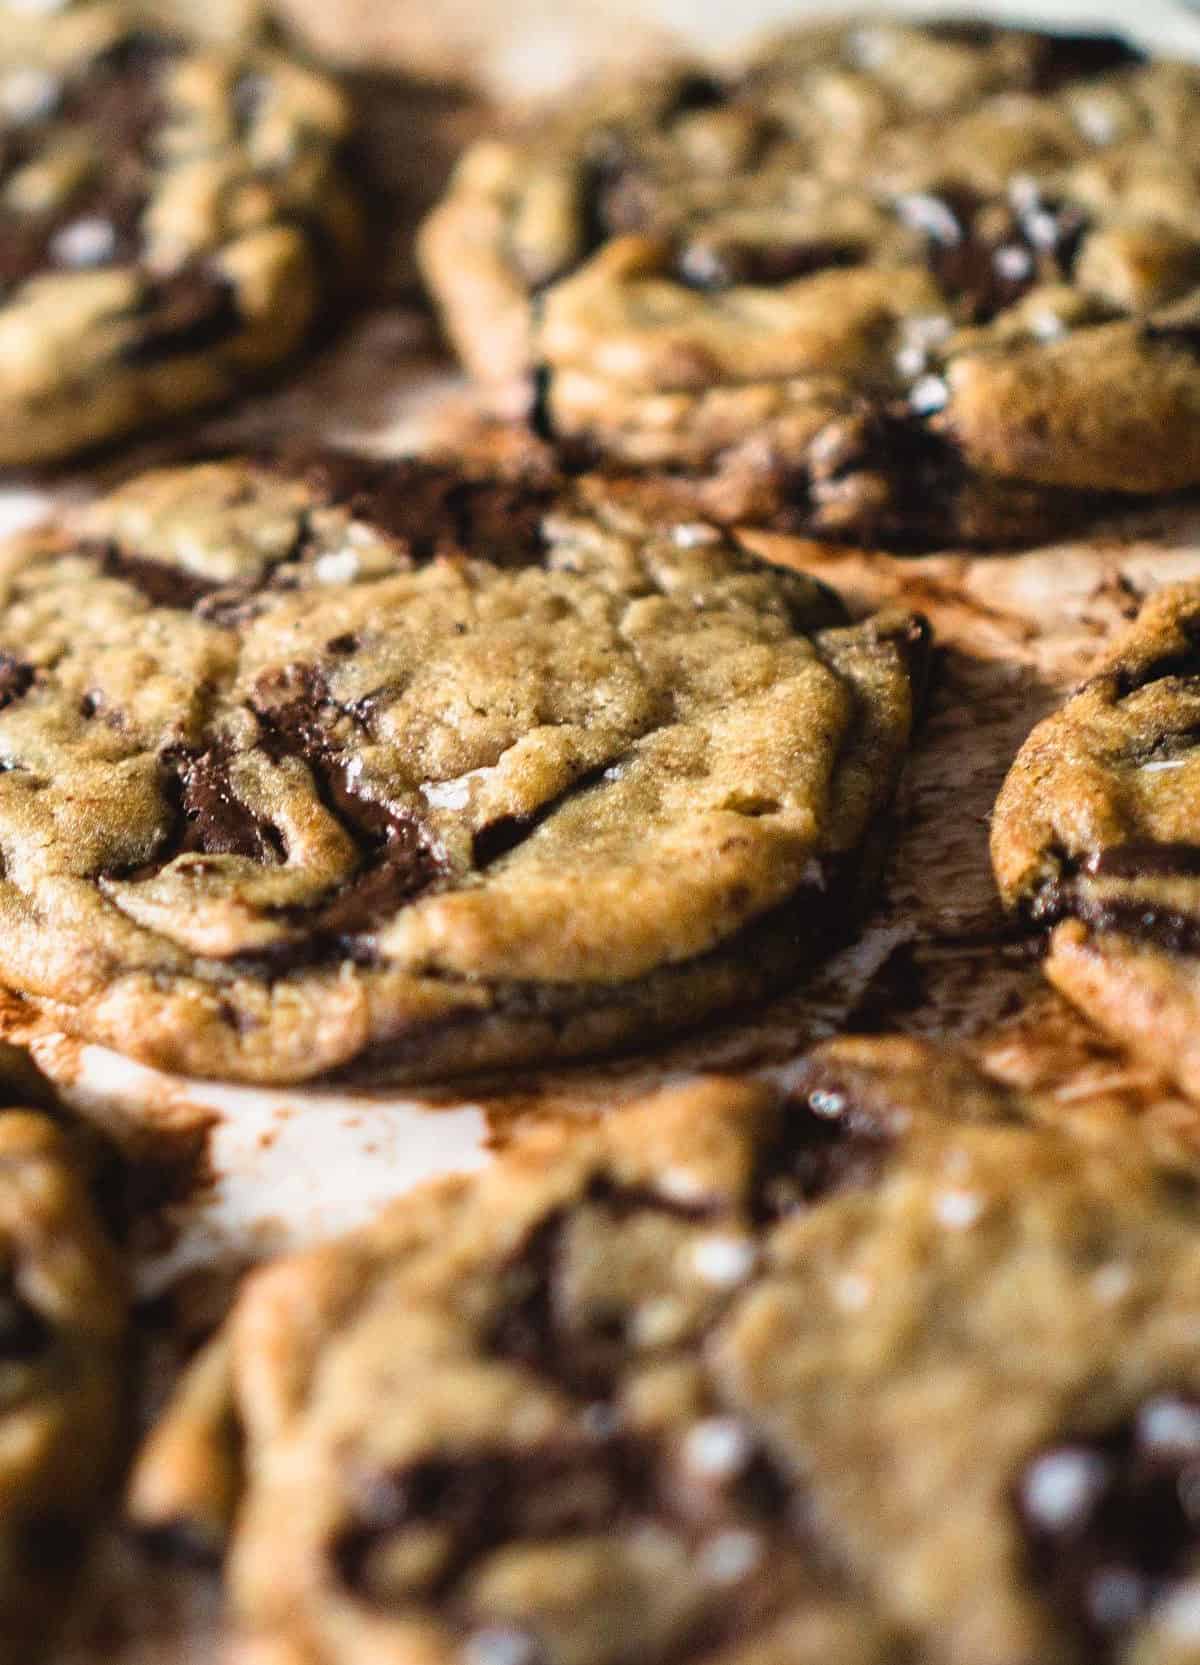  These cookies are not your average sweet treat!